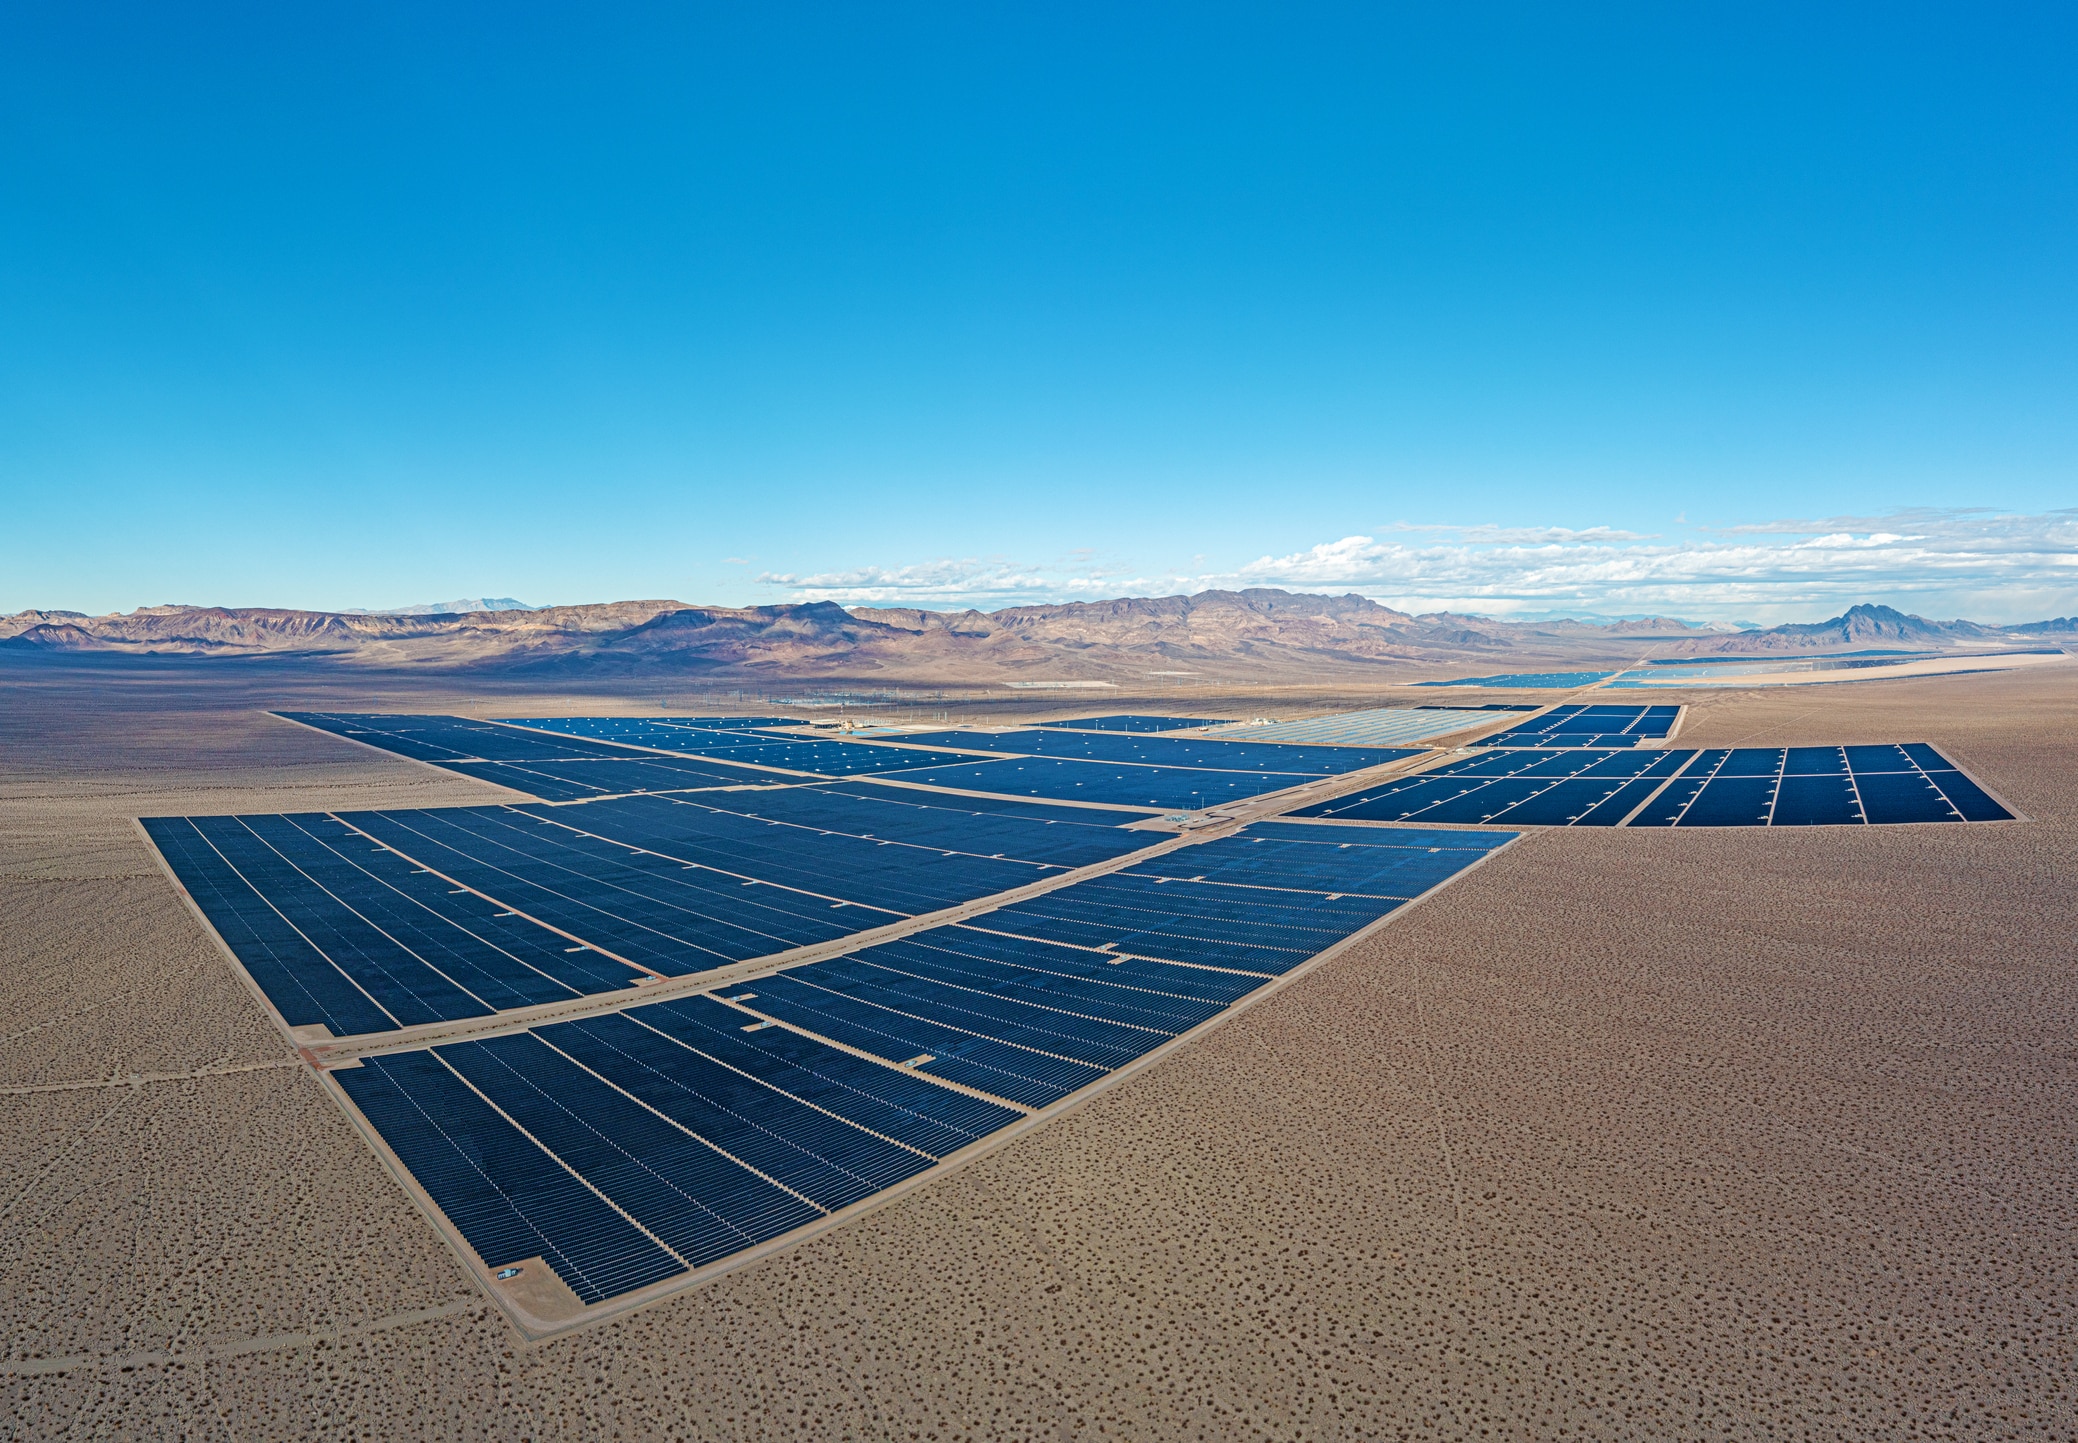 Drone panorama over a solar power plant in the Nevada desert during the day in winter sunshine